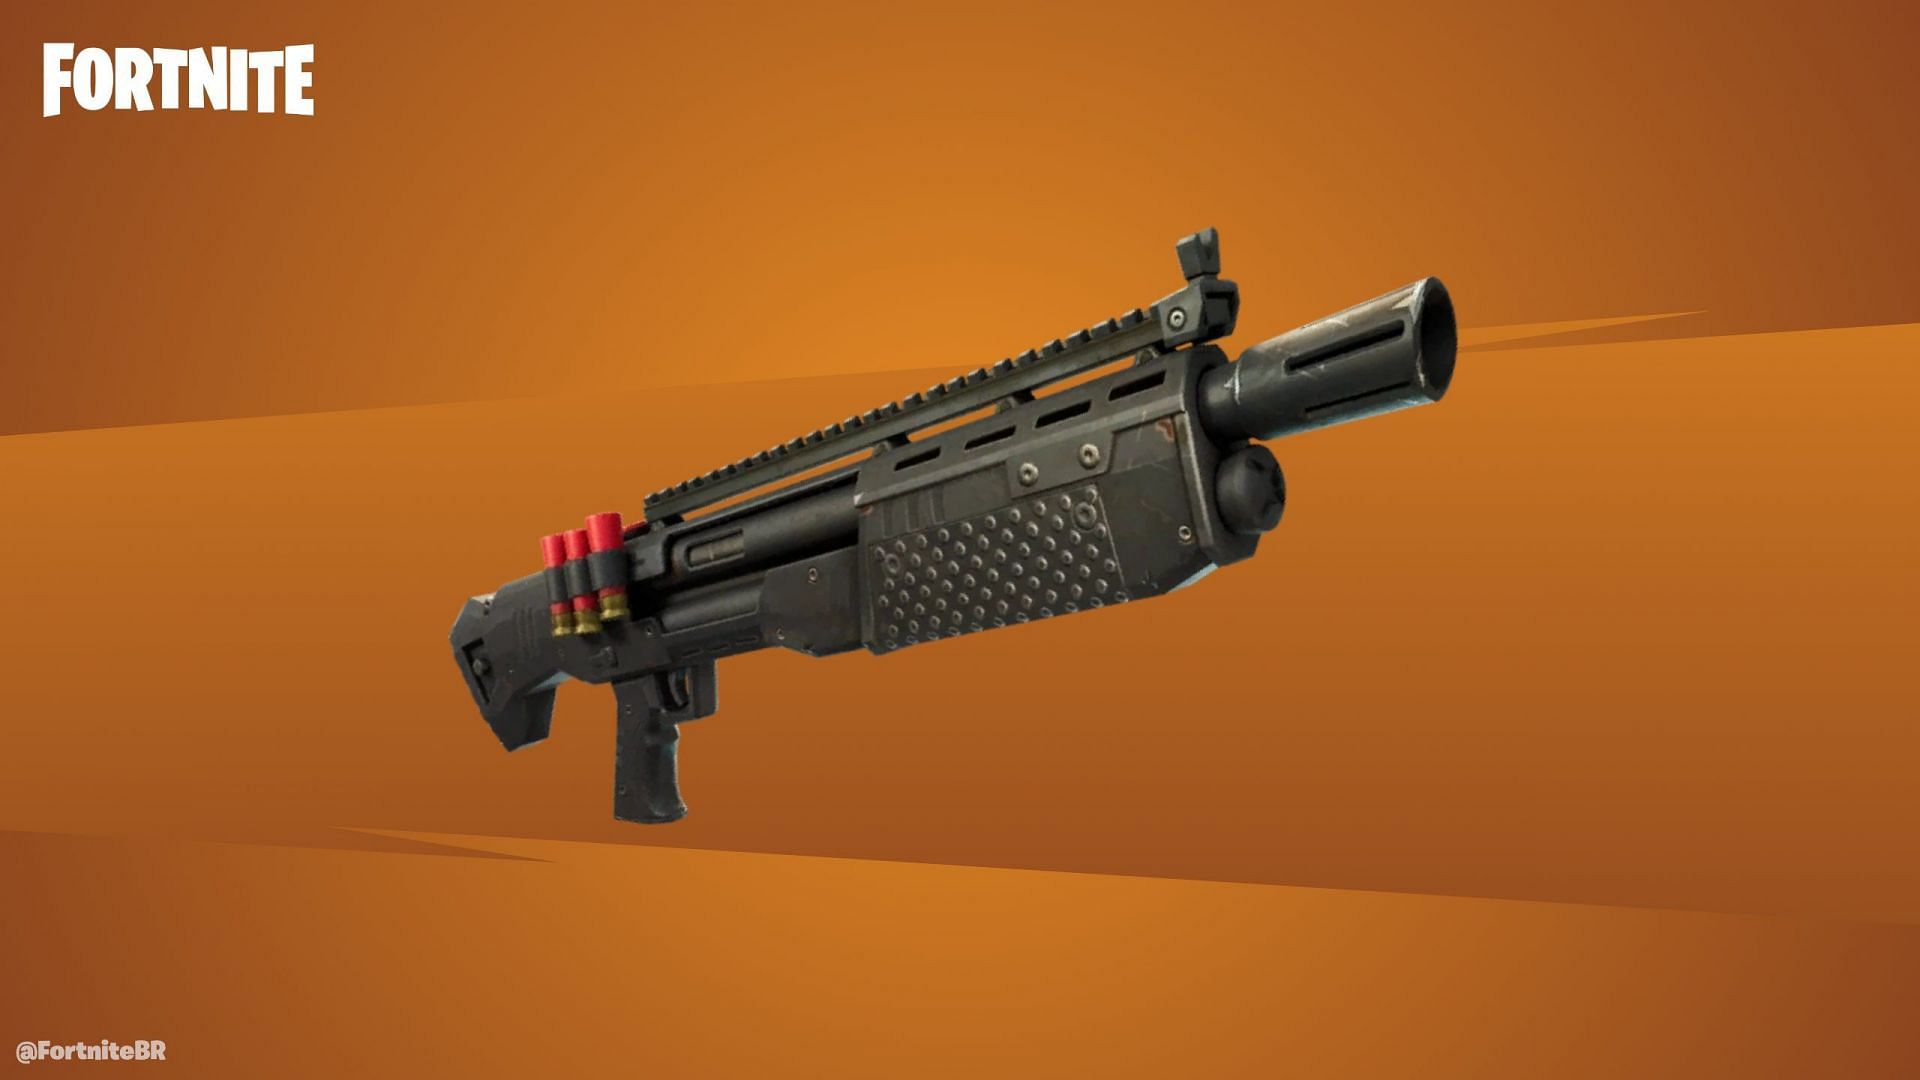 The Heavy Shotgun is as powerful as a sniper in Chapter 3 Season 1 (Image via Fortnite News/Twitter)